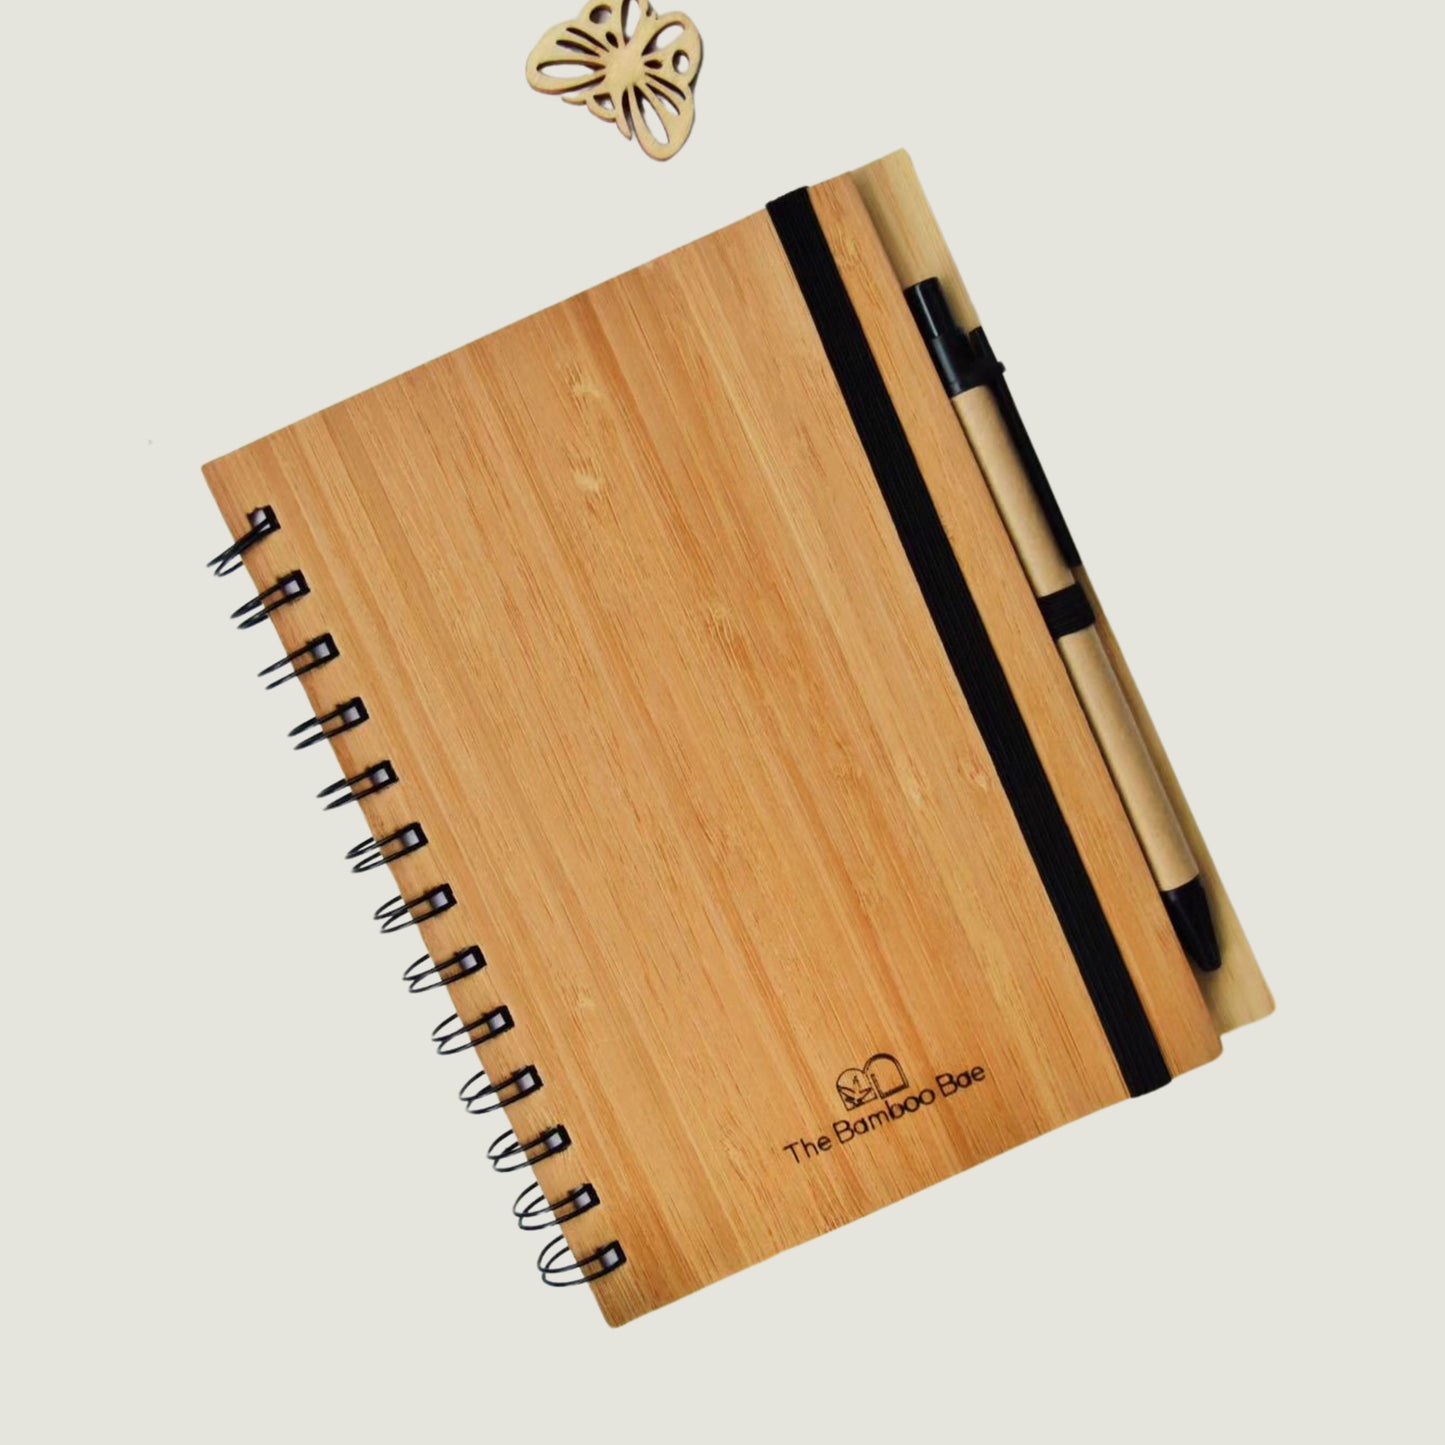 Bamboo Corporate Gift Bundle | Combo for Corporate Students Friends | Bamboo Notebook Mobile Stand Pen Key Chain